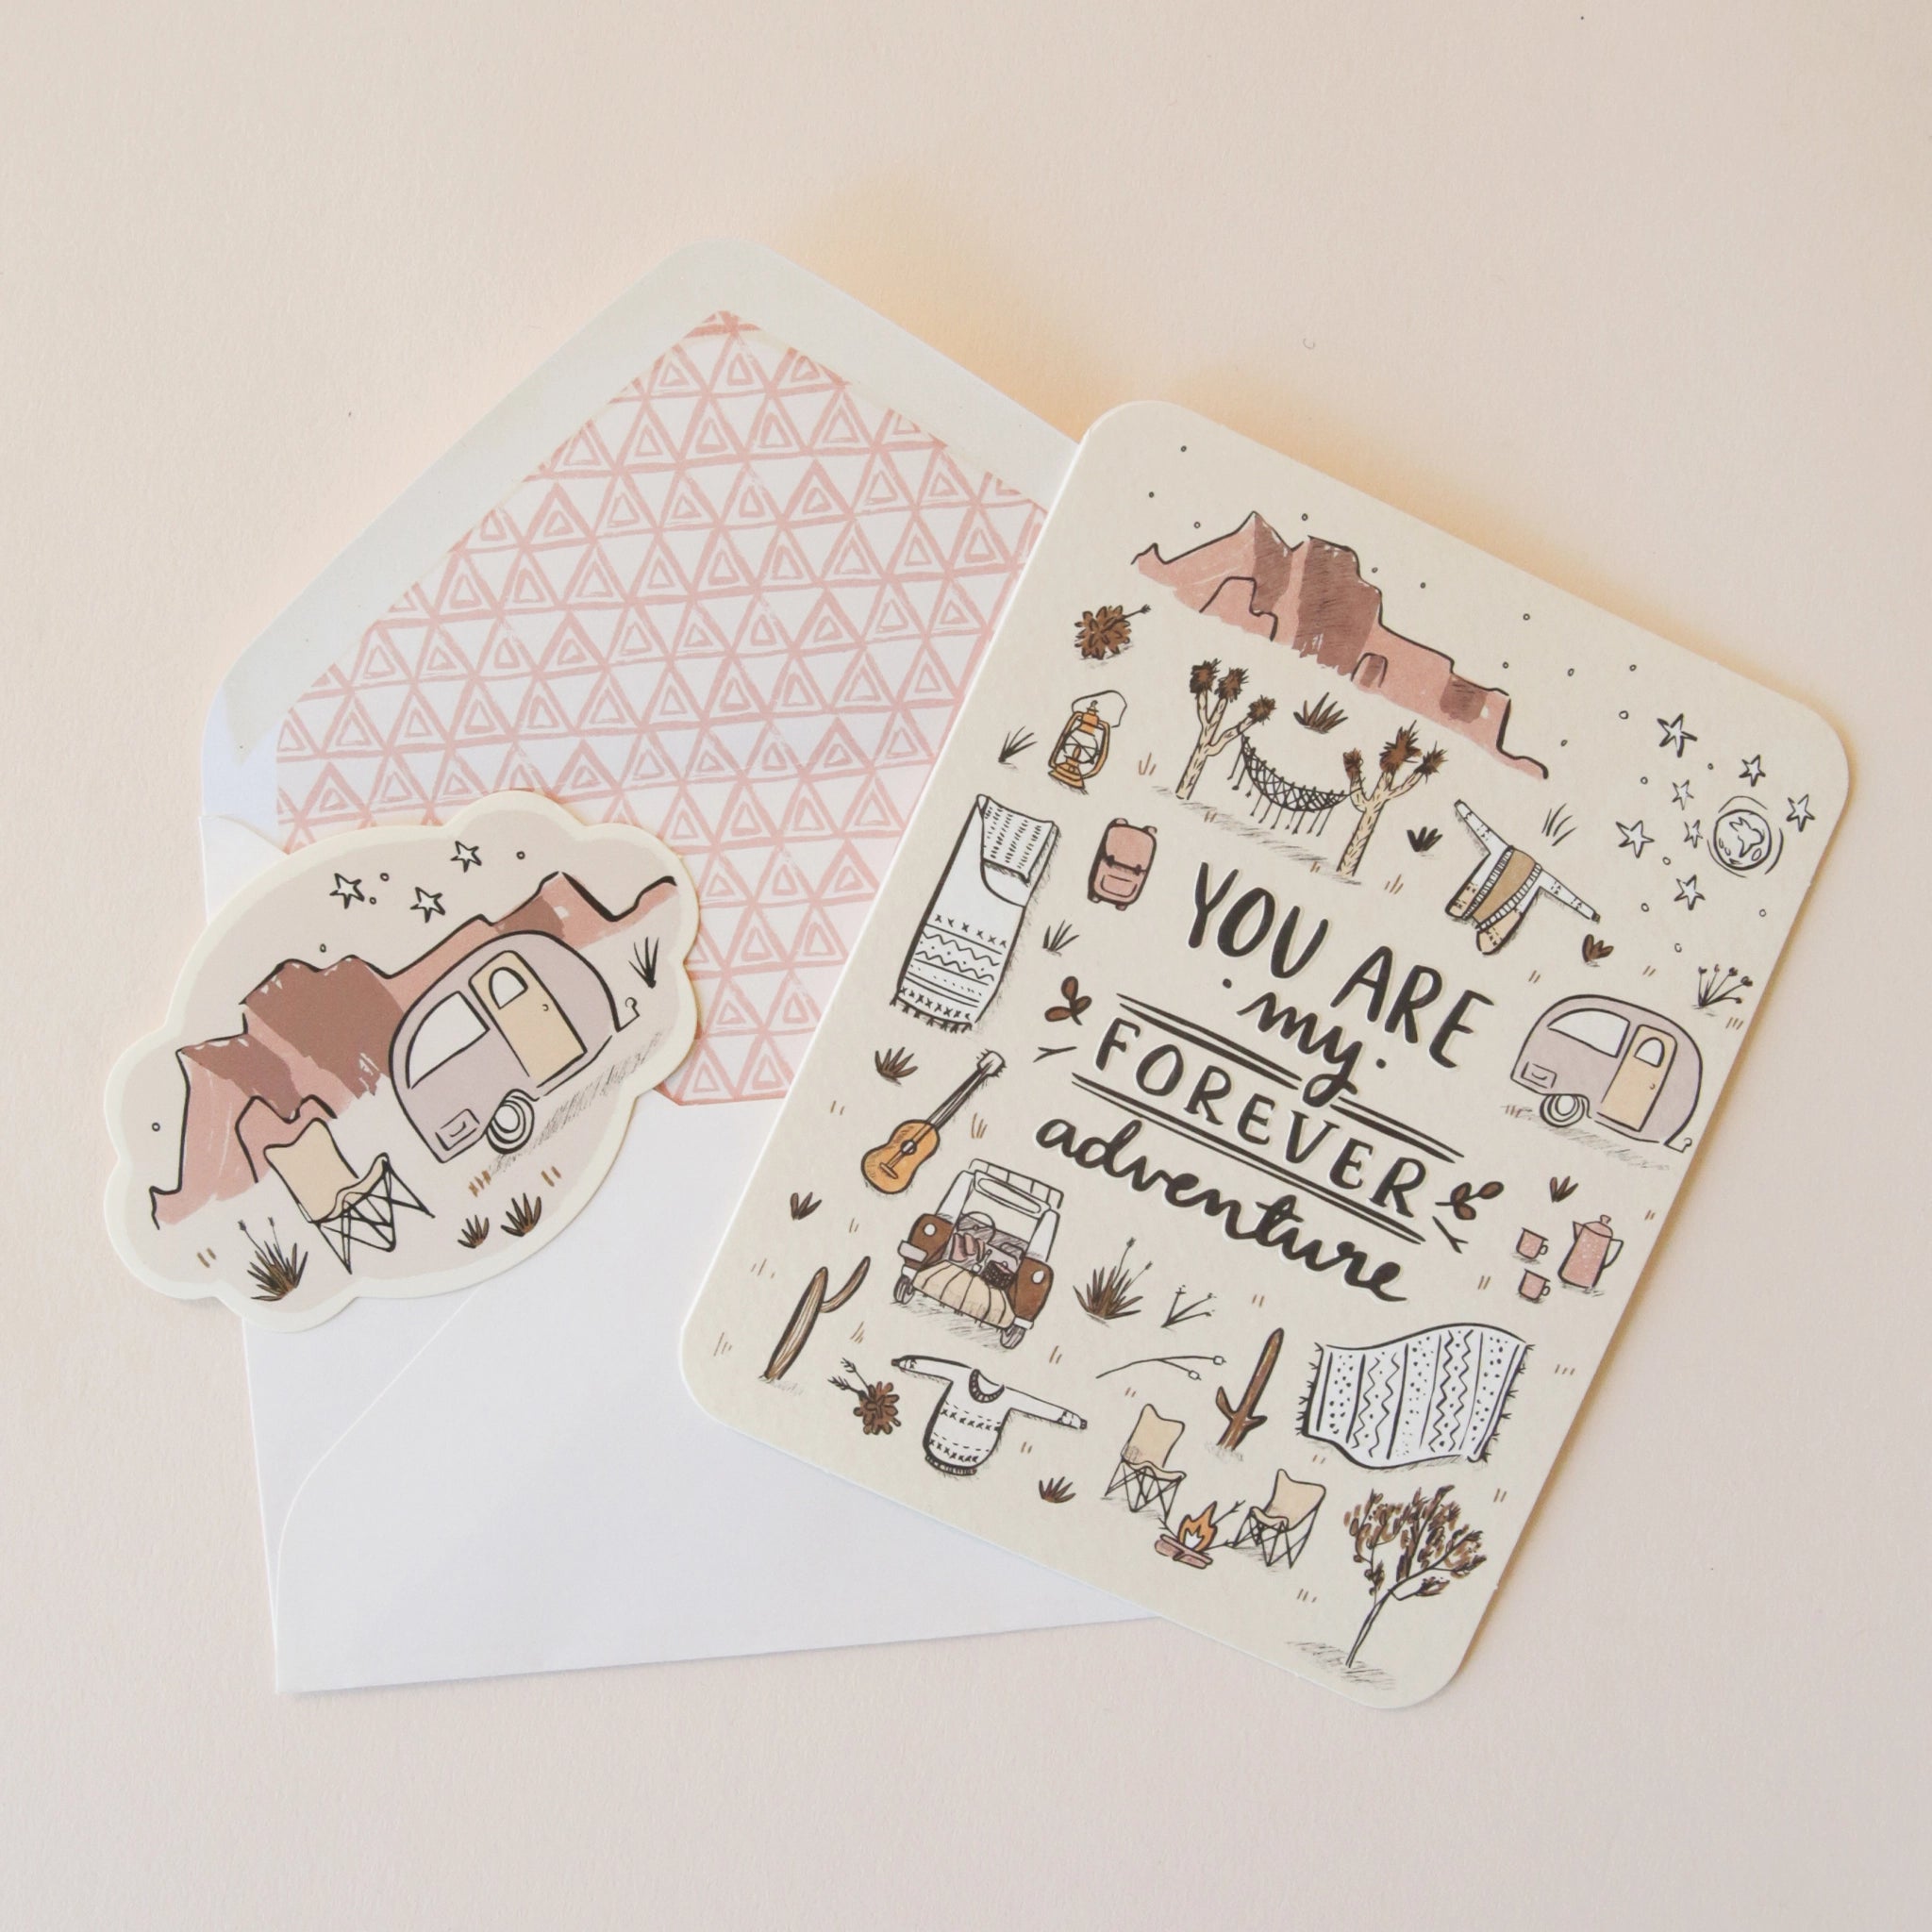 On a neutral background is an ivory card with text in the center that reads, "You Are My Forever Adventure" along with illustrations of various desert camping and road-tripping items, like a camper, a hammock, stars, a campfire and chairs etc as well as a sticker that is included with purchase.